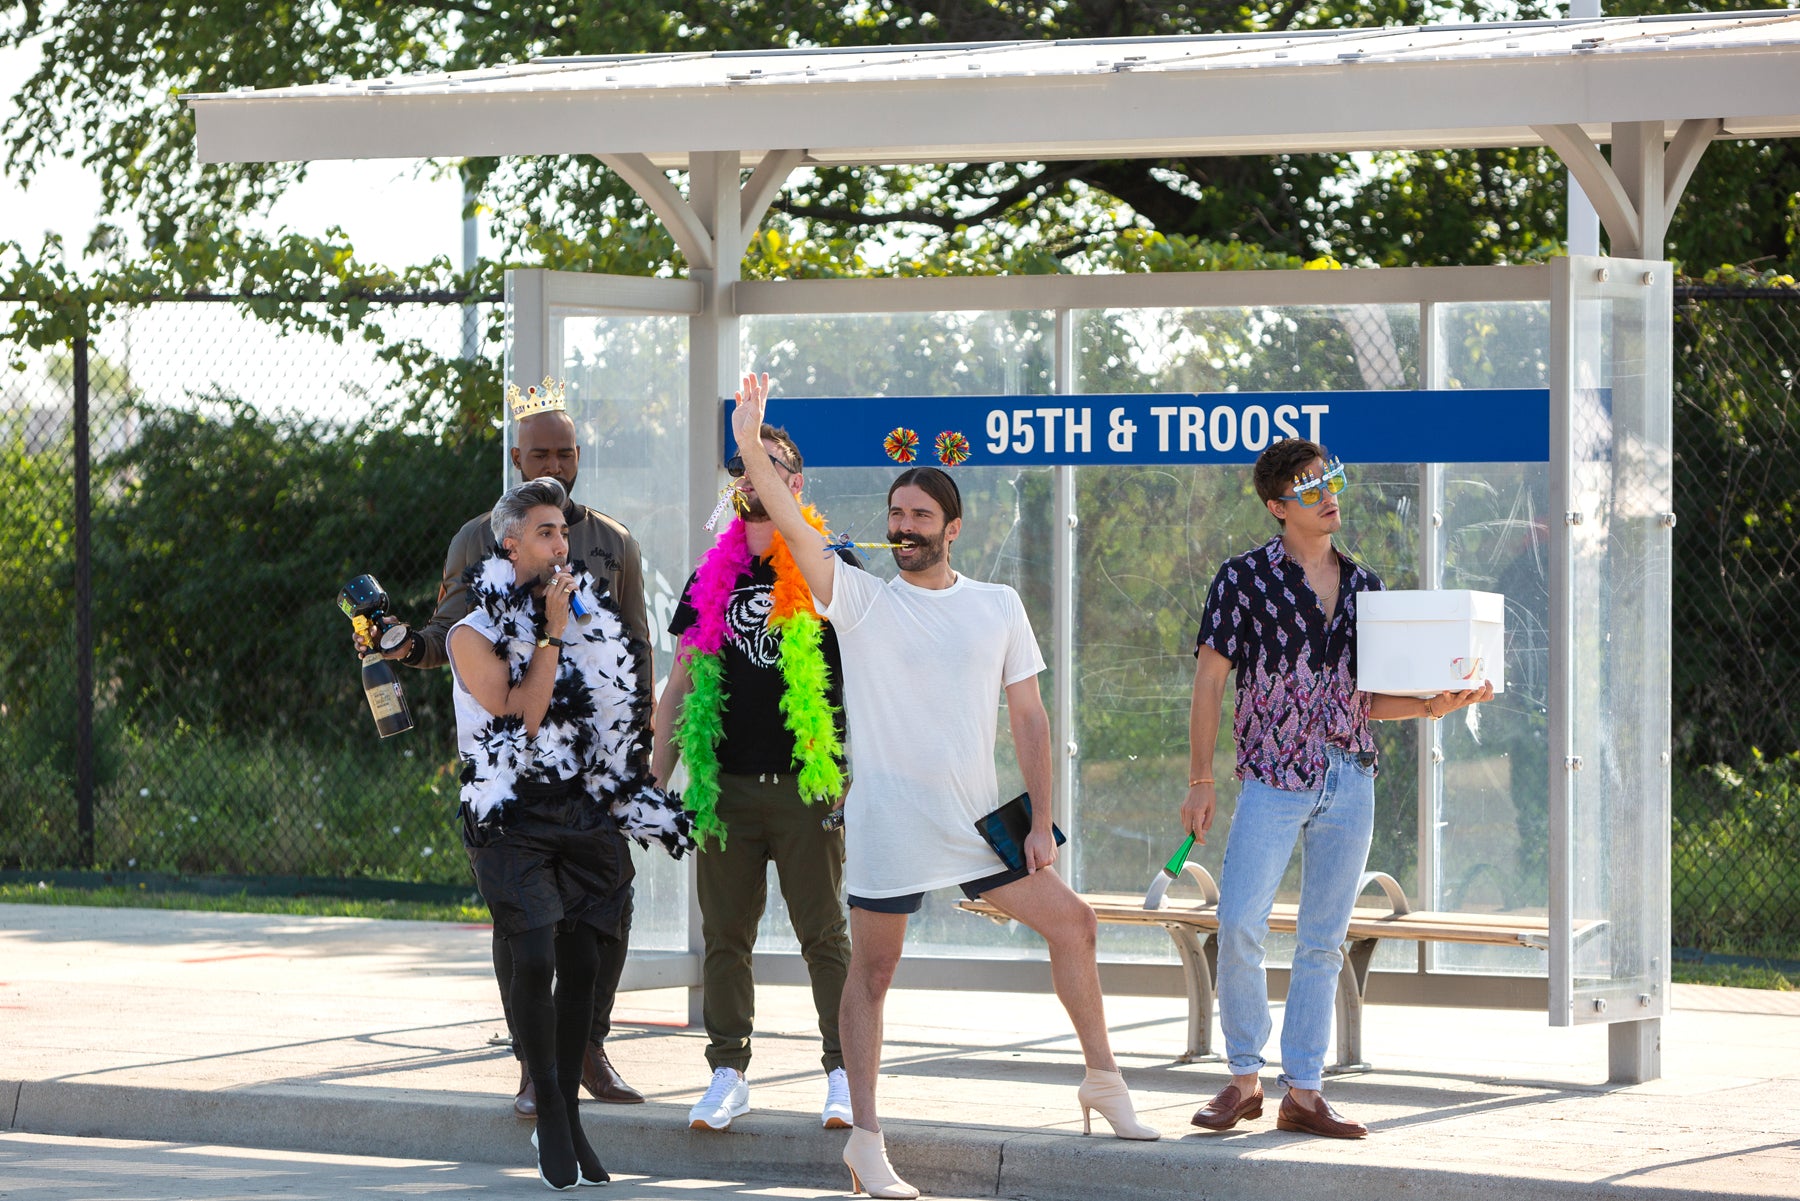 Karamo, Tan, Bobby, Jonathan, and Antoni wear party accessories and stand at a bus stop with a sign that says “95th & Troost” in an episode of Queer Eye.